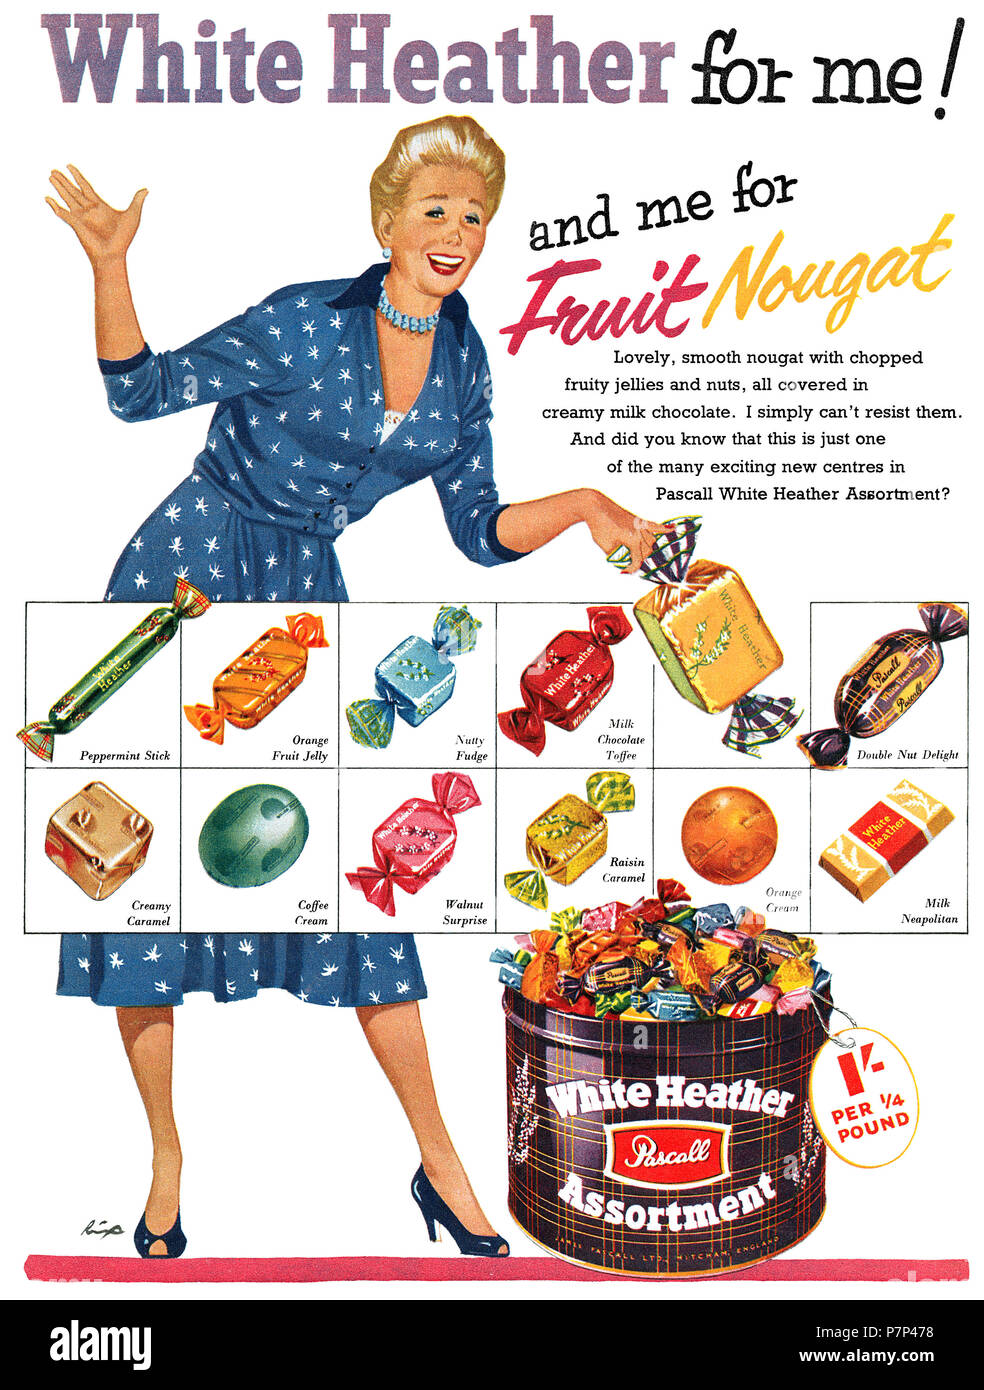 1956 British advertisement for White Heather chocolates by Pascall, illustrated by Aubrey Rix. Stock Photo